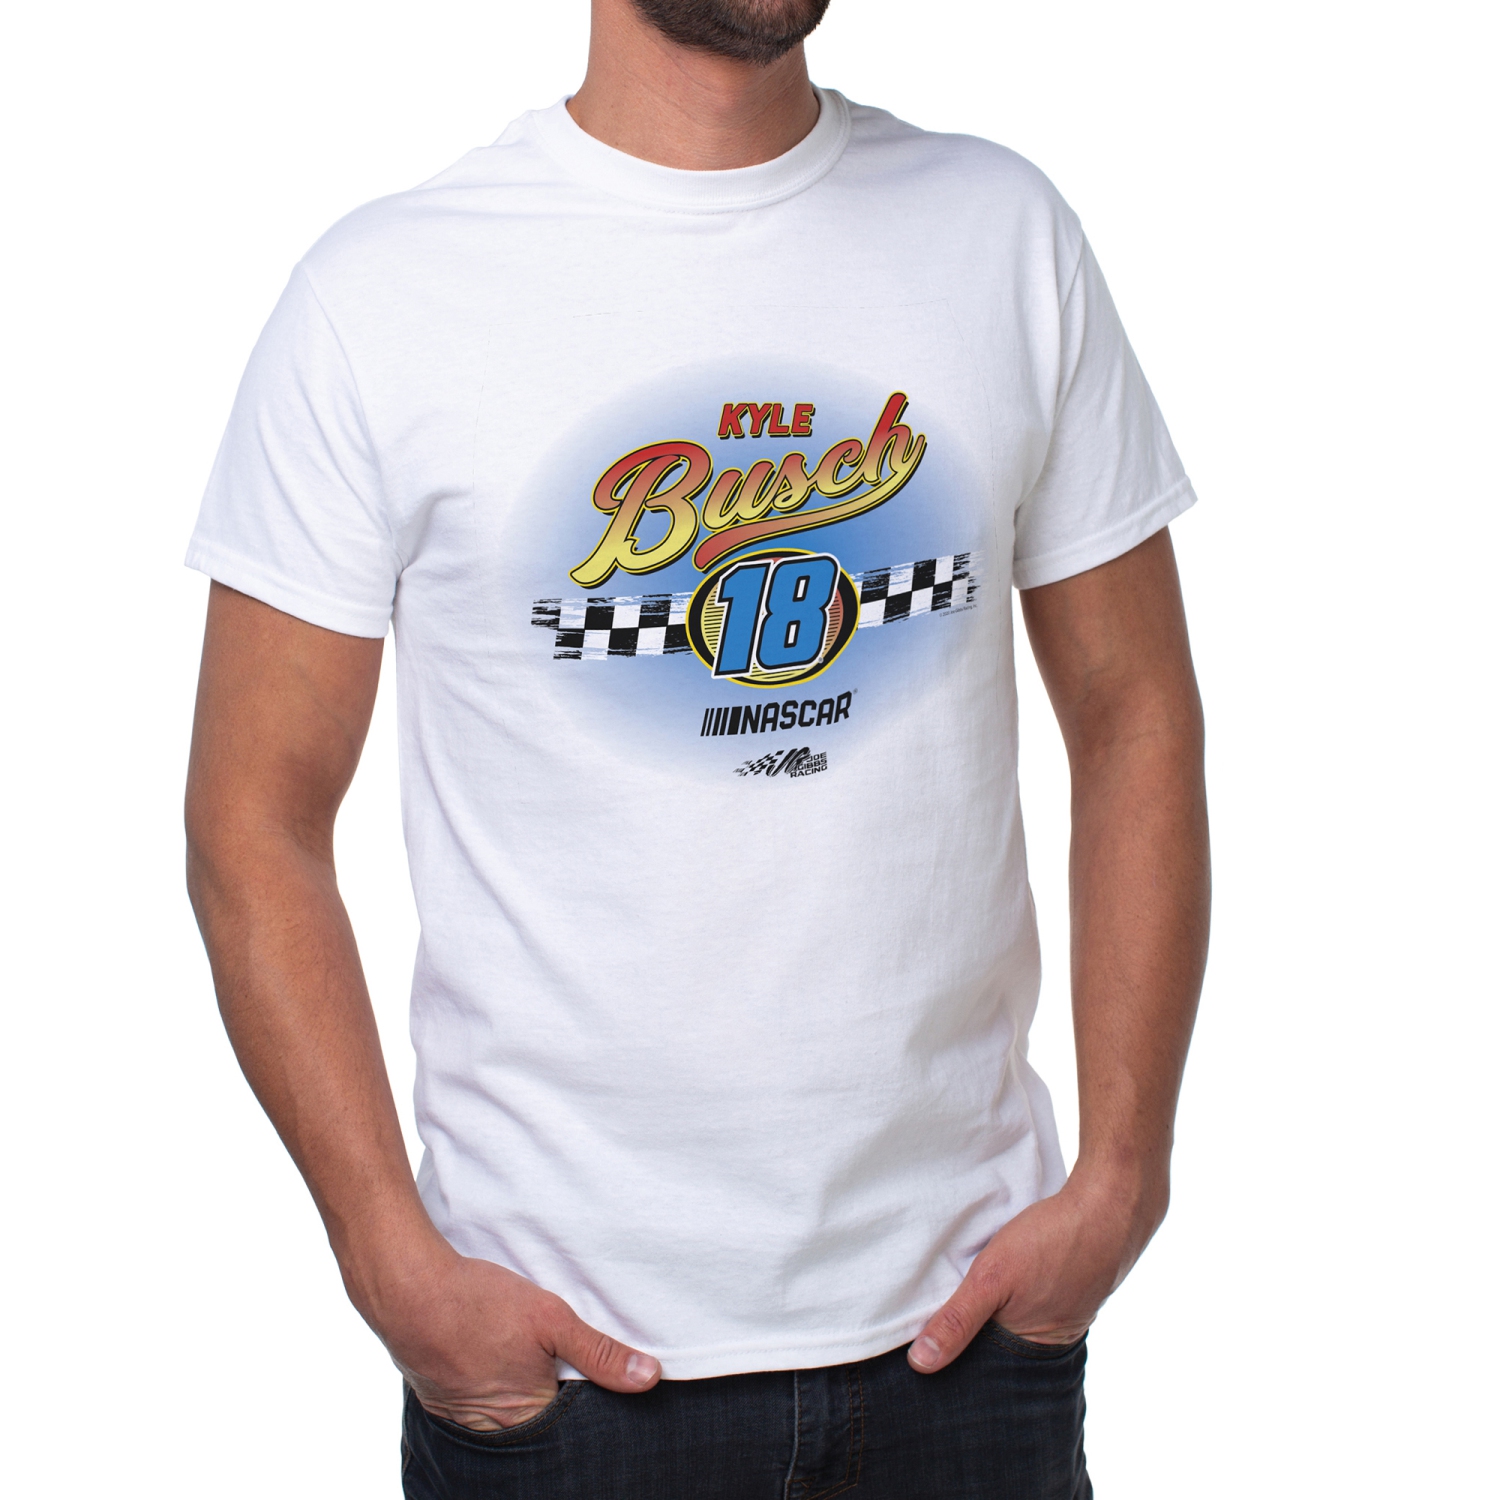 NASCAR Mens Classic Crew Tee - Kyle Busch - 11 White by DelSol for Men - 1 Pc T-Shirt (S)